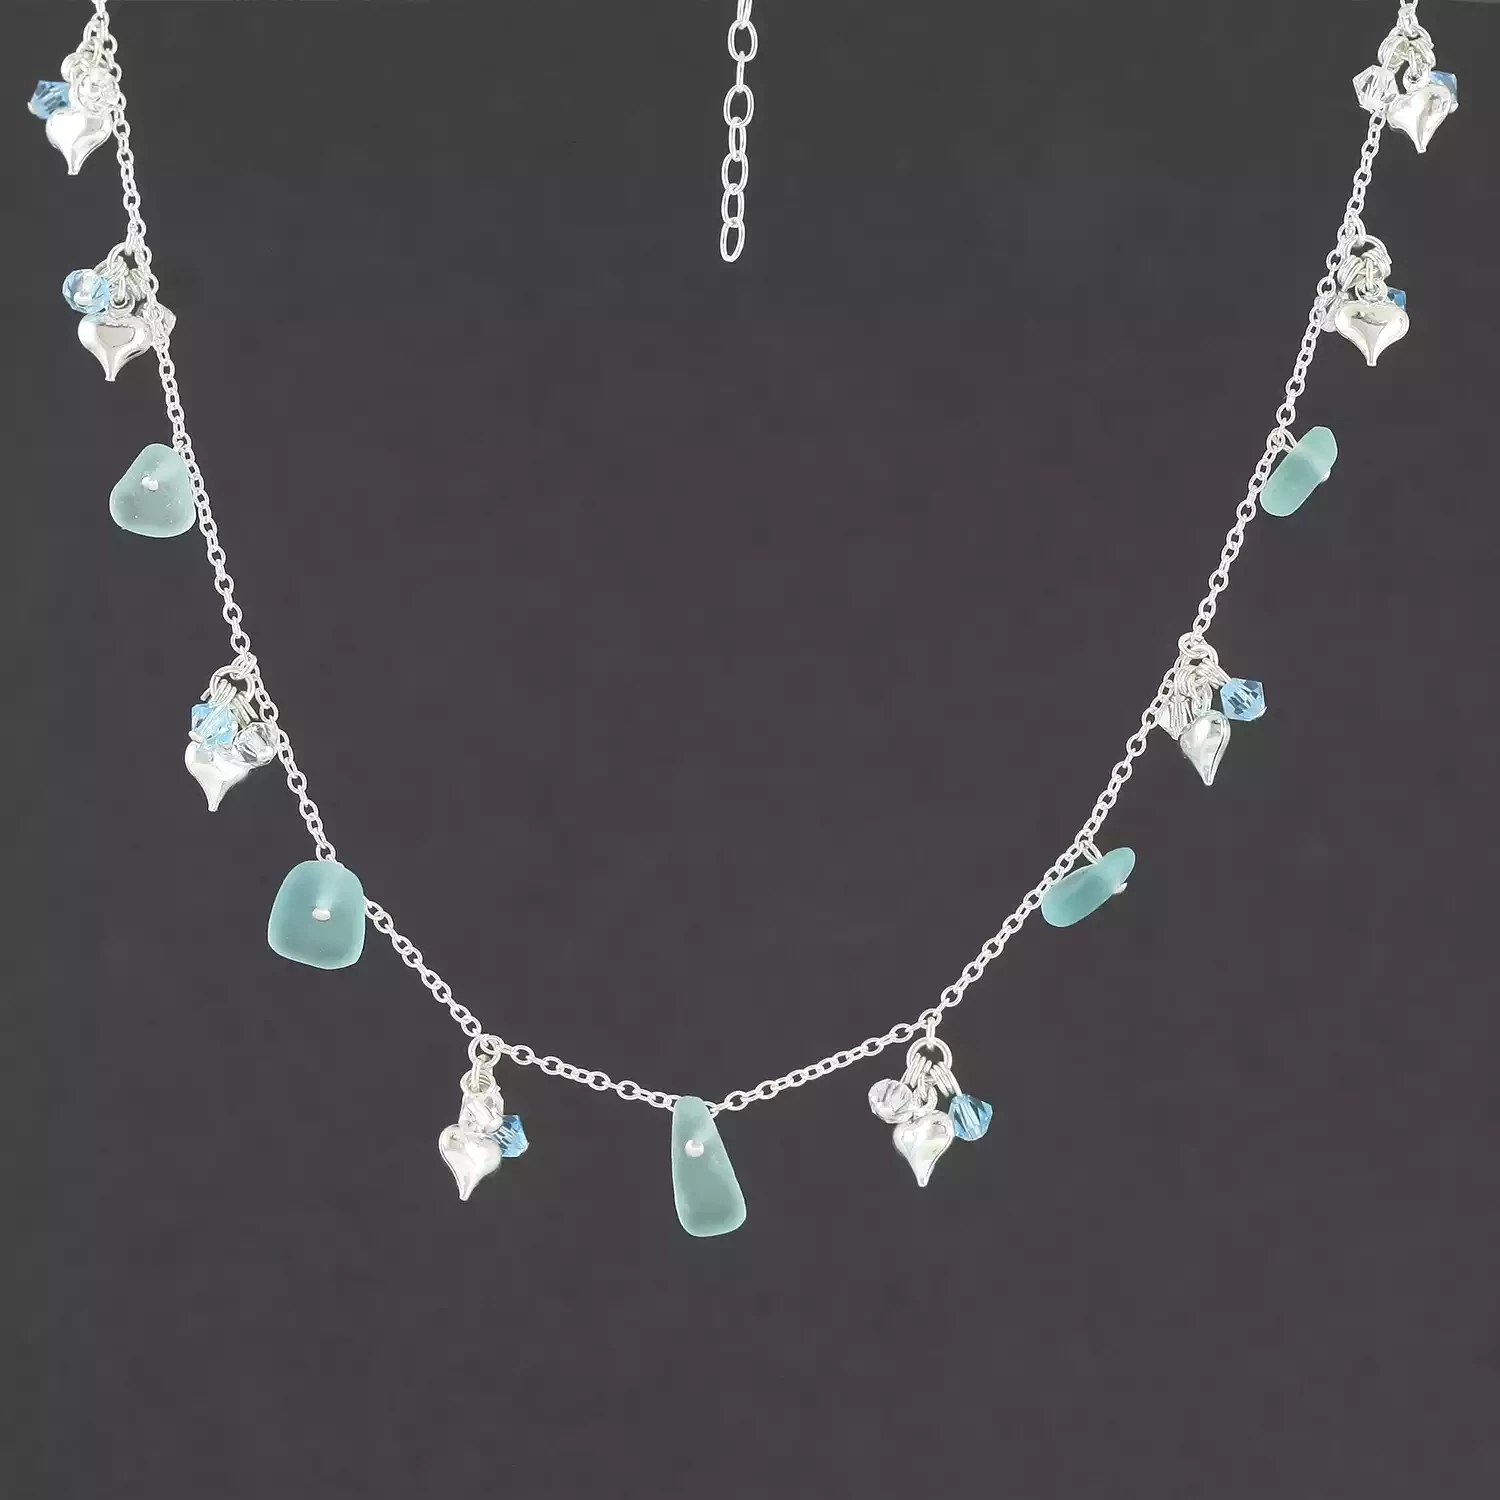 Sea Glass and Crystal Silver Necklace - Sea Blue by Gaynor Hebden-Smith